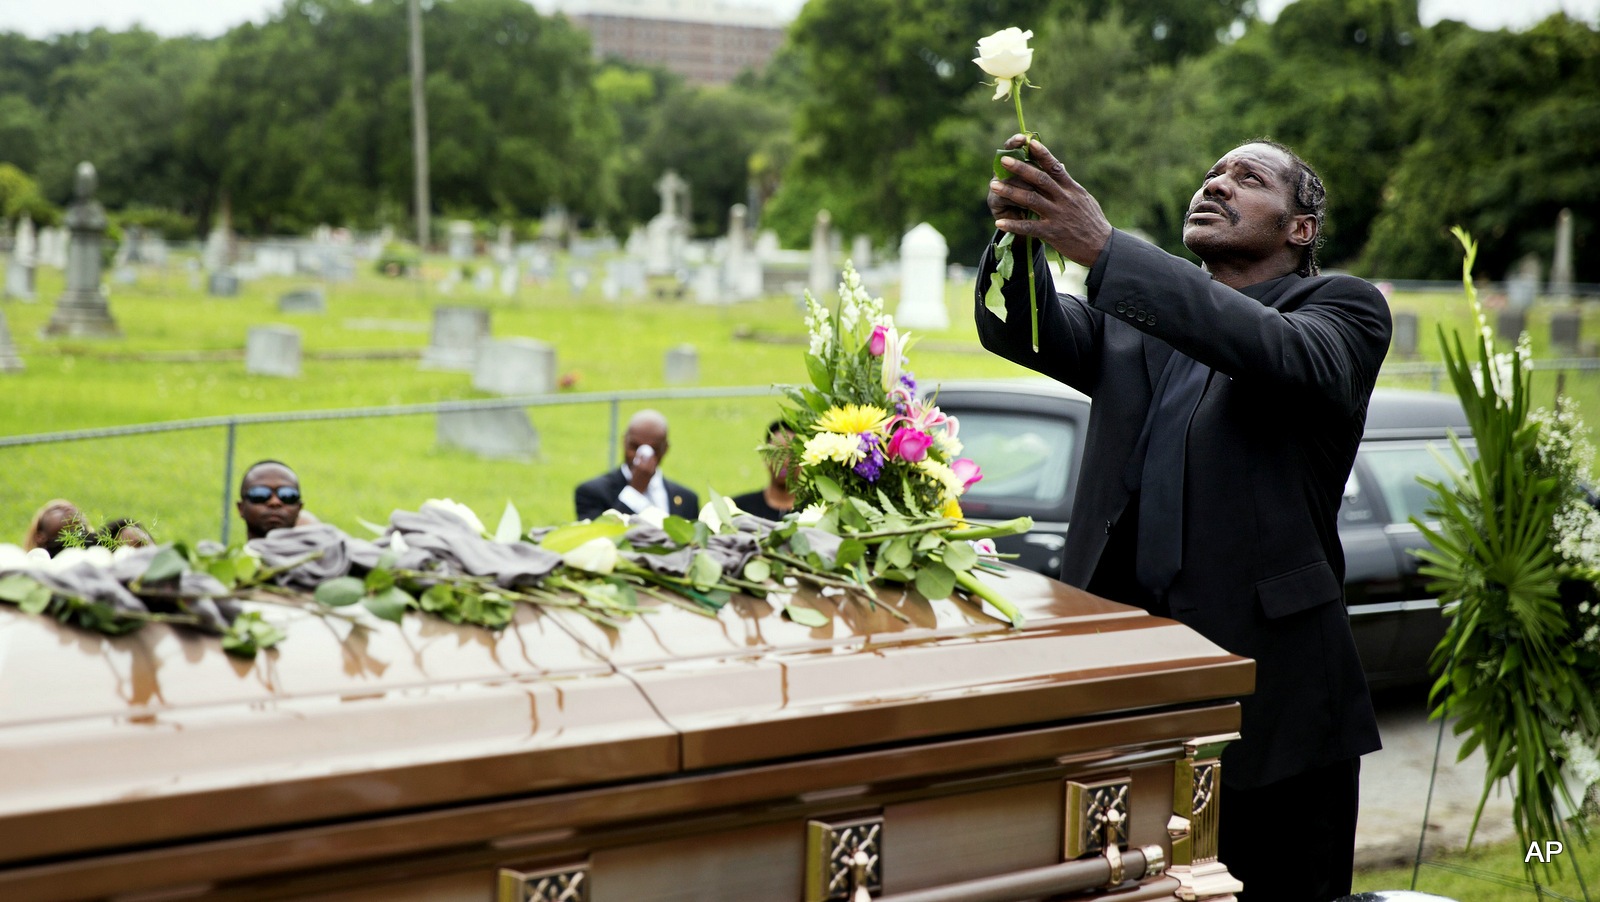 Gary Washington holds up a rose before placing it on the casket of his mother, Ethel Lance, following her burial service